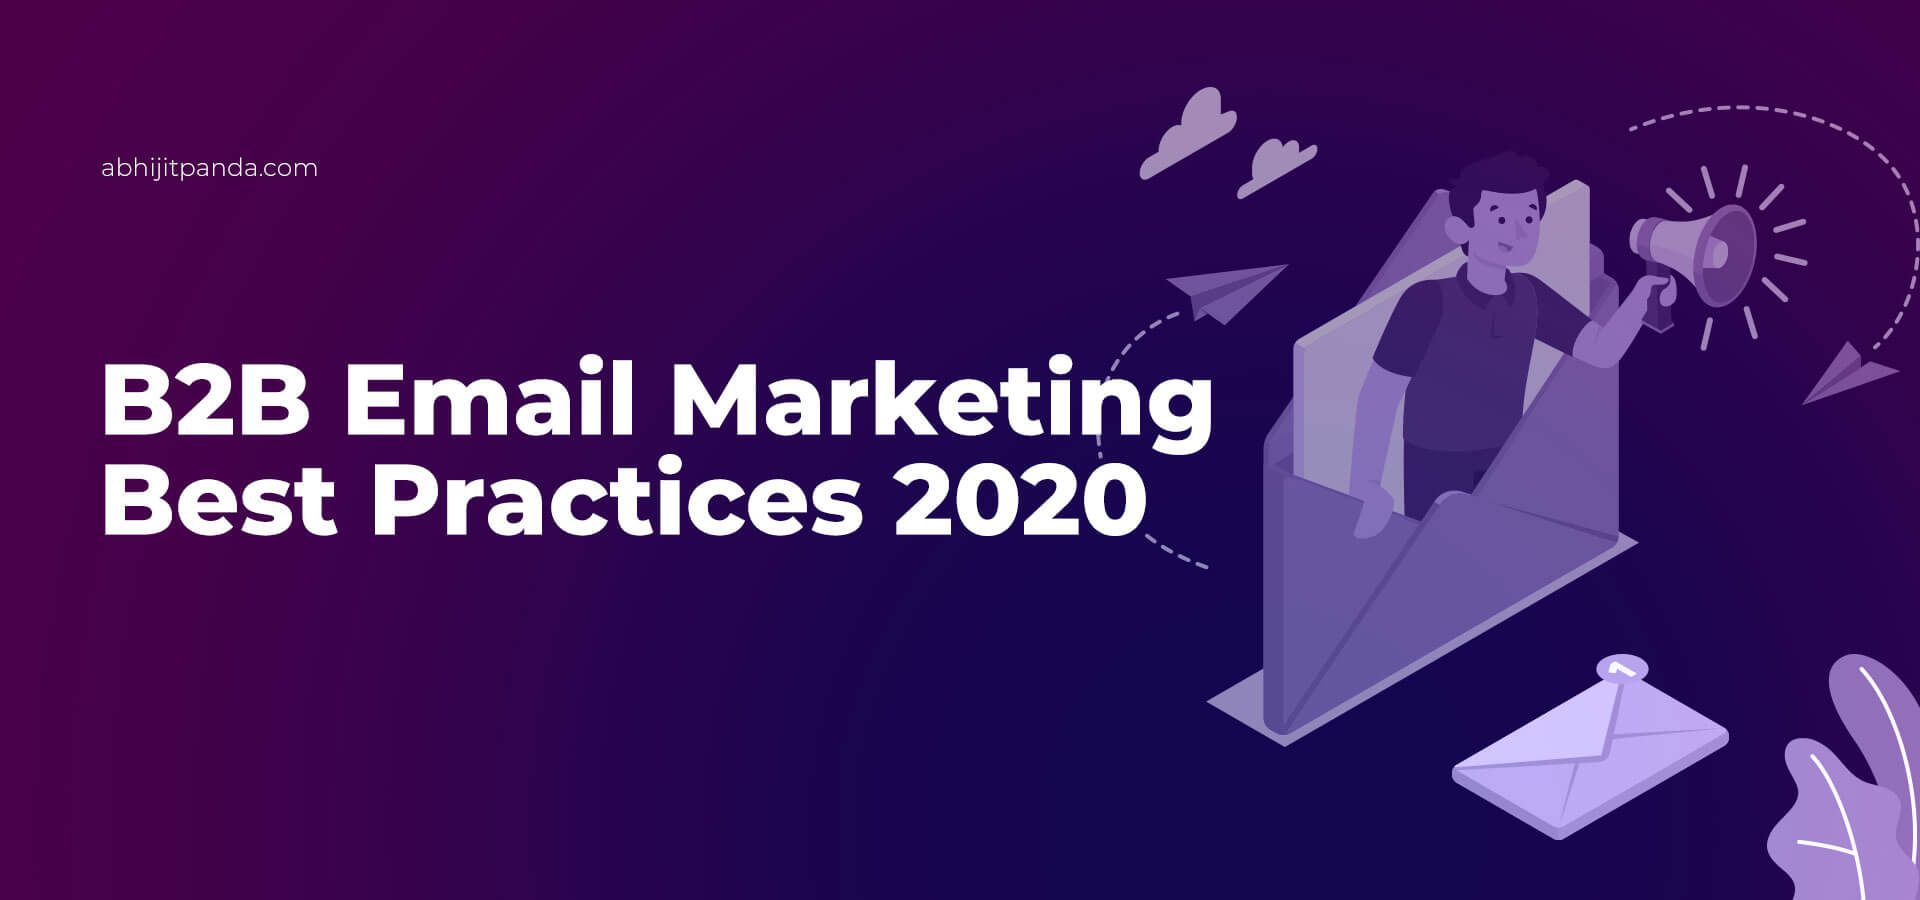 B2B Email Marketing Best Practices